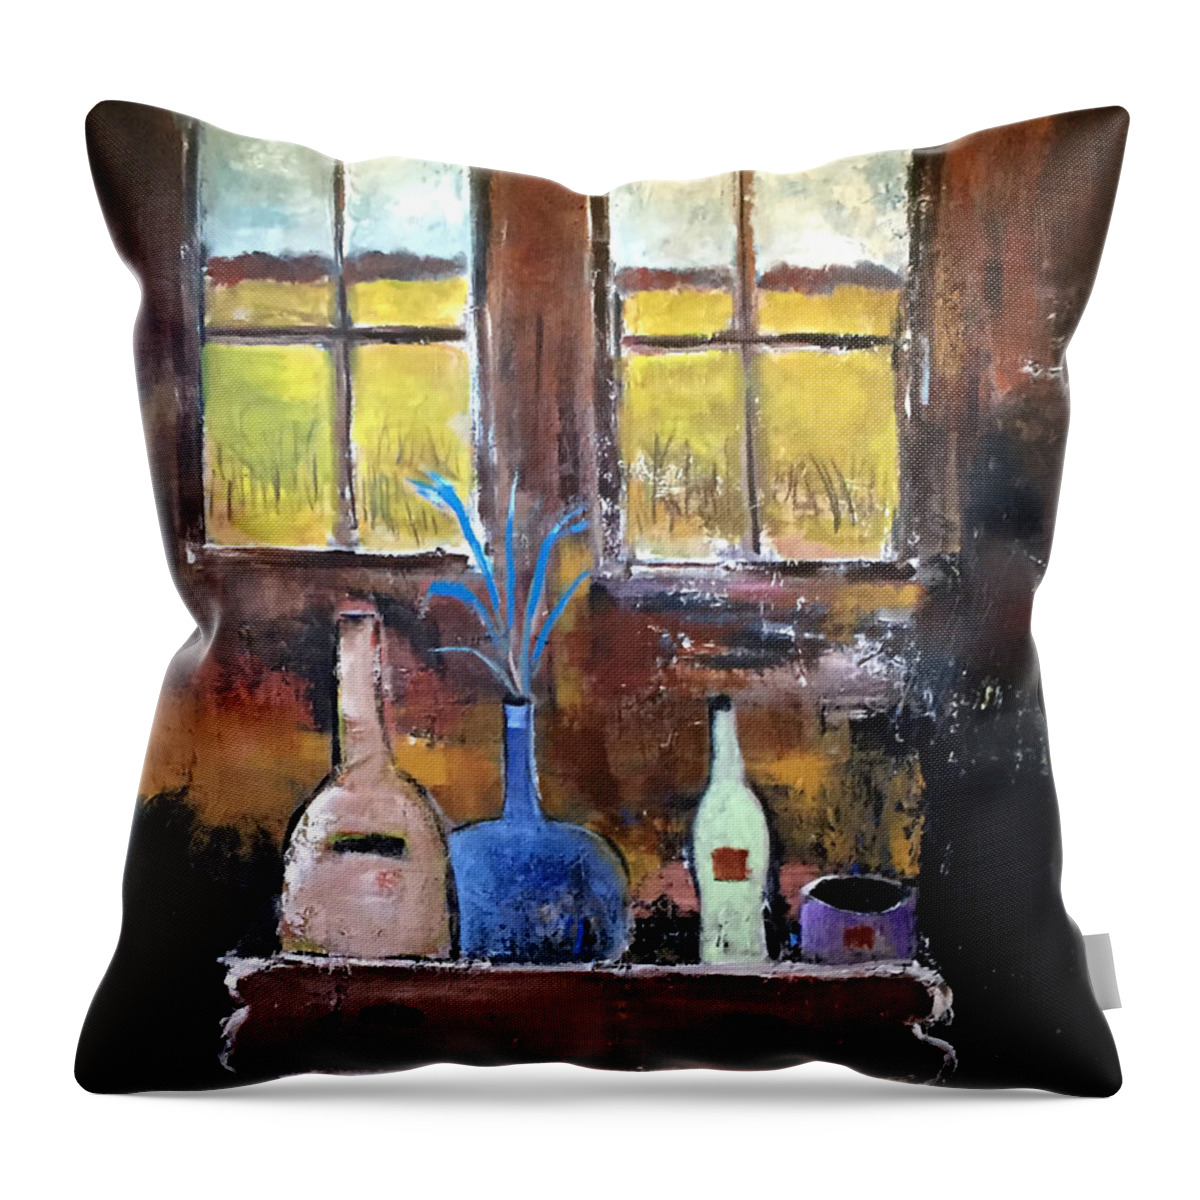 Barn Throw Pillow featuring the painting Imaginary Interior by Dennis Ellman